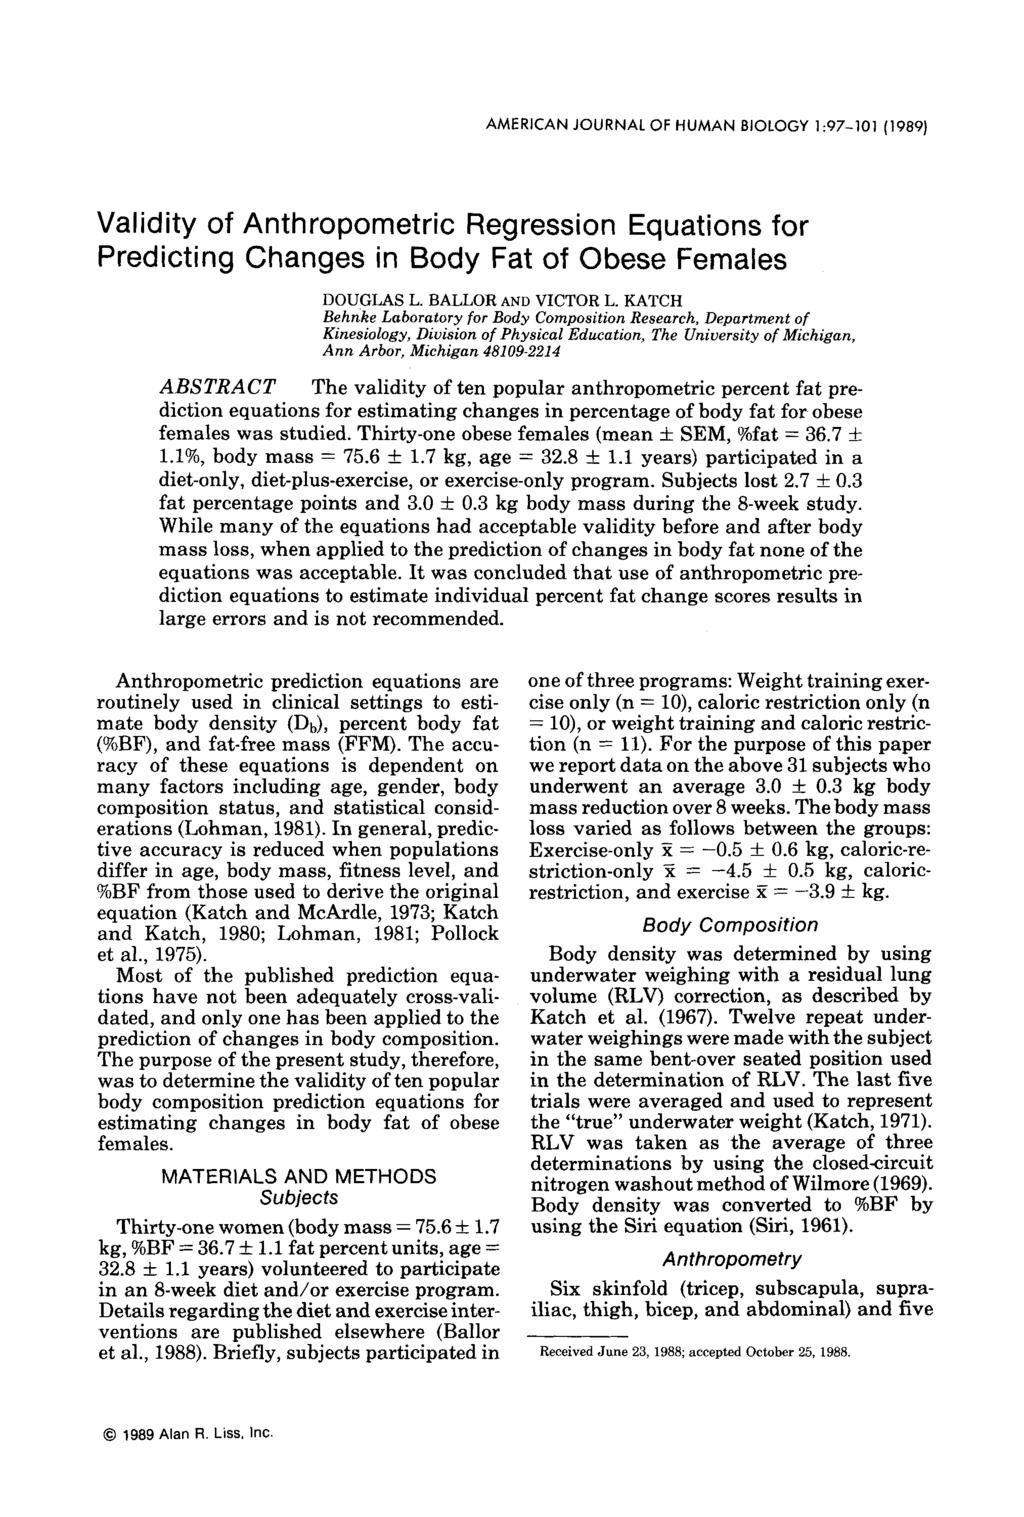 AMERICAN JOURNAL OF HUMAN BIOLOGY 1:97-101 (1989) Validity of Anthropometric Regression Equations for Predicting Changes in Body Fat of Obese Females DOUGLAS L. BALLOR AND VICTOR L.